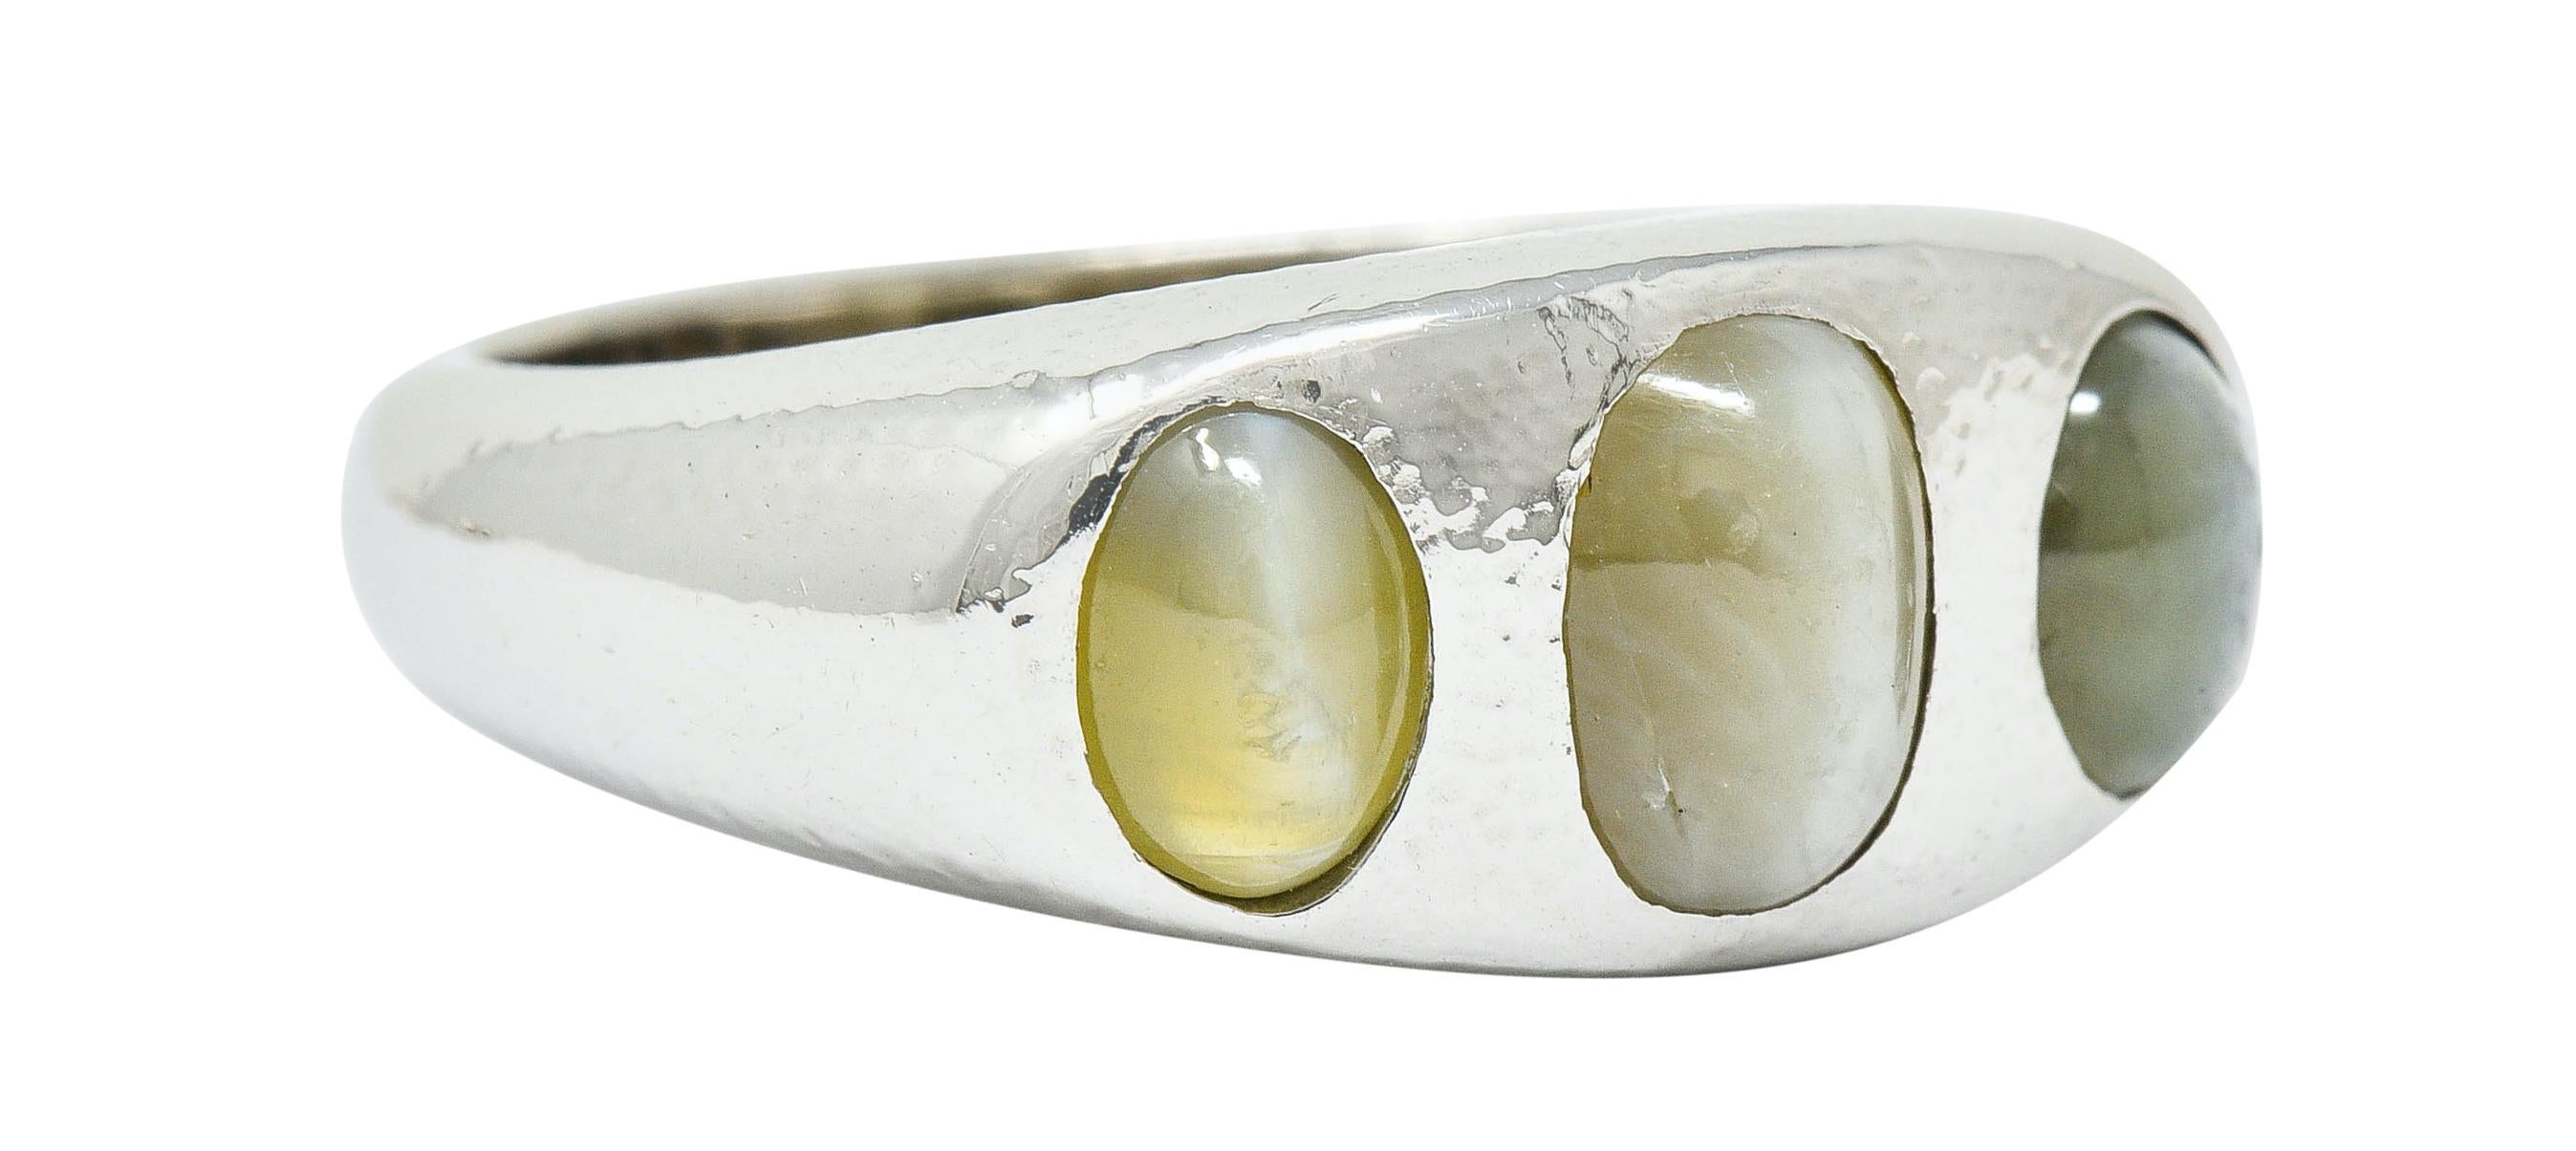 Hammered band ring centers three flush set cat's eye chrysoberyl

Translucent with light green color to yellowish-green

All exhibit a crisp chatoyant white line

Stamped 18K for 18 karat gold

Ring Size: 6 & sizable

Measures: 8.7 mm wide and sits